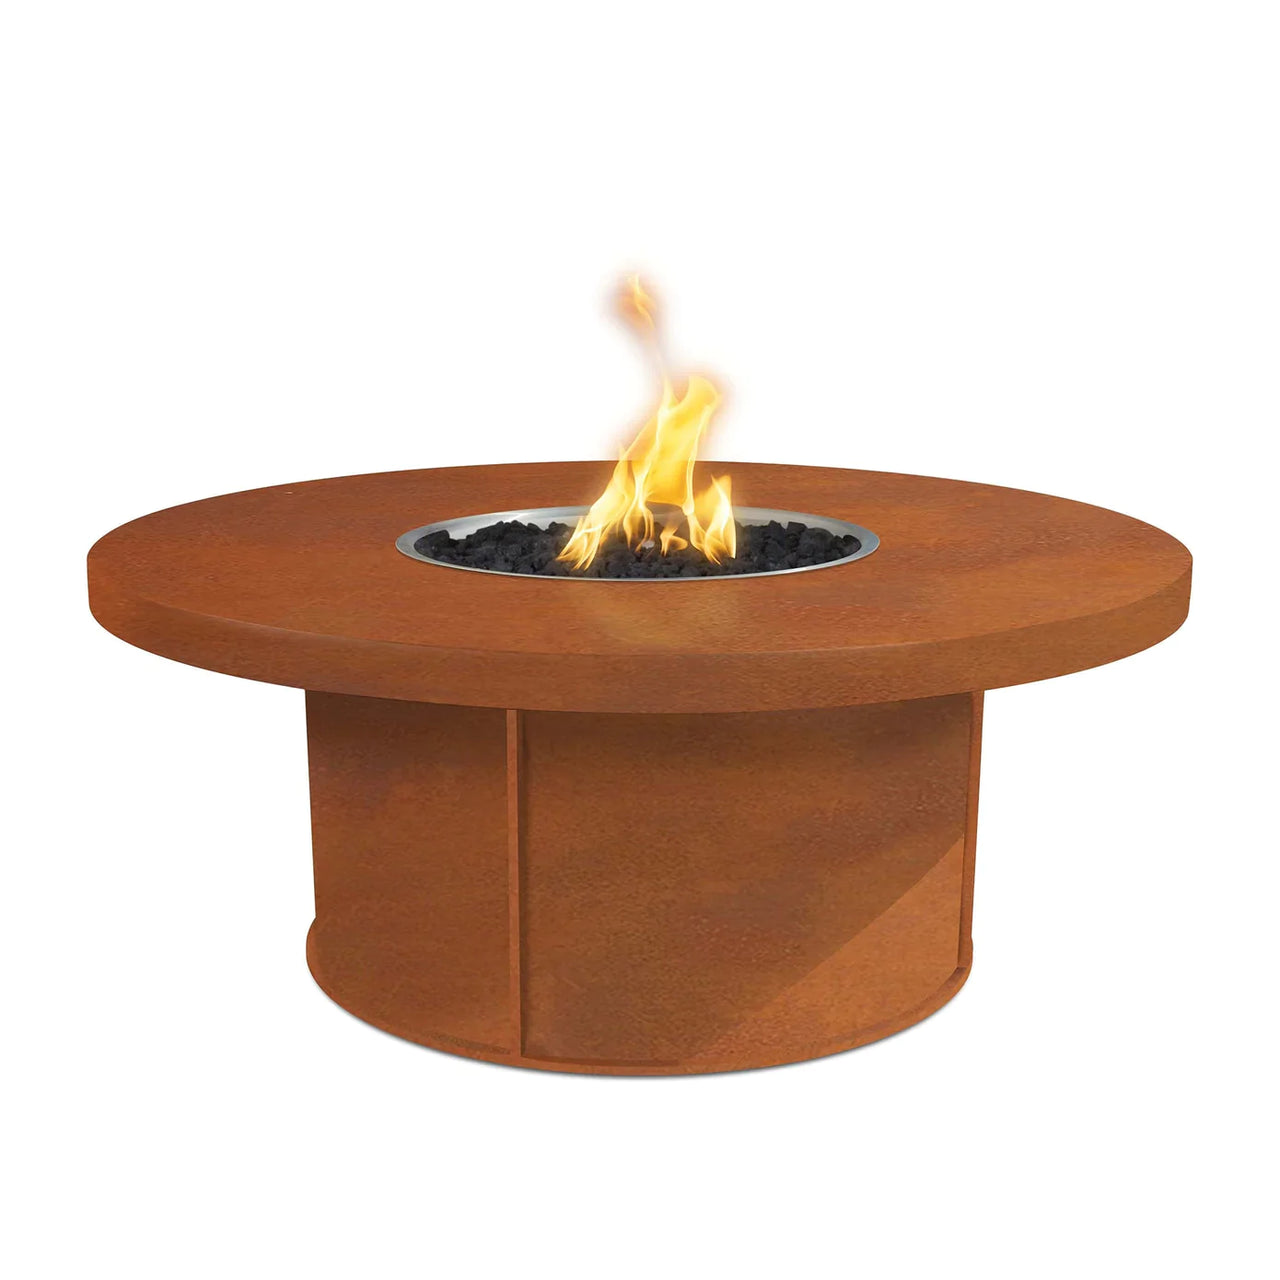 The Outdoor Plus 48" Round Mabel Corten Steel Fire Table